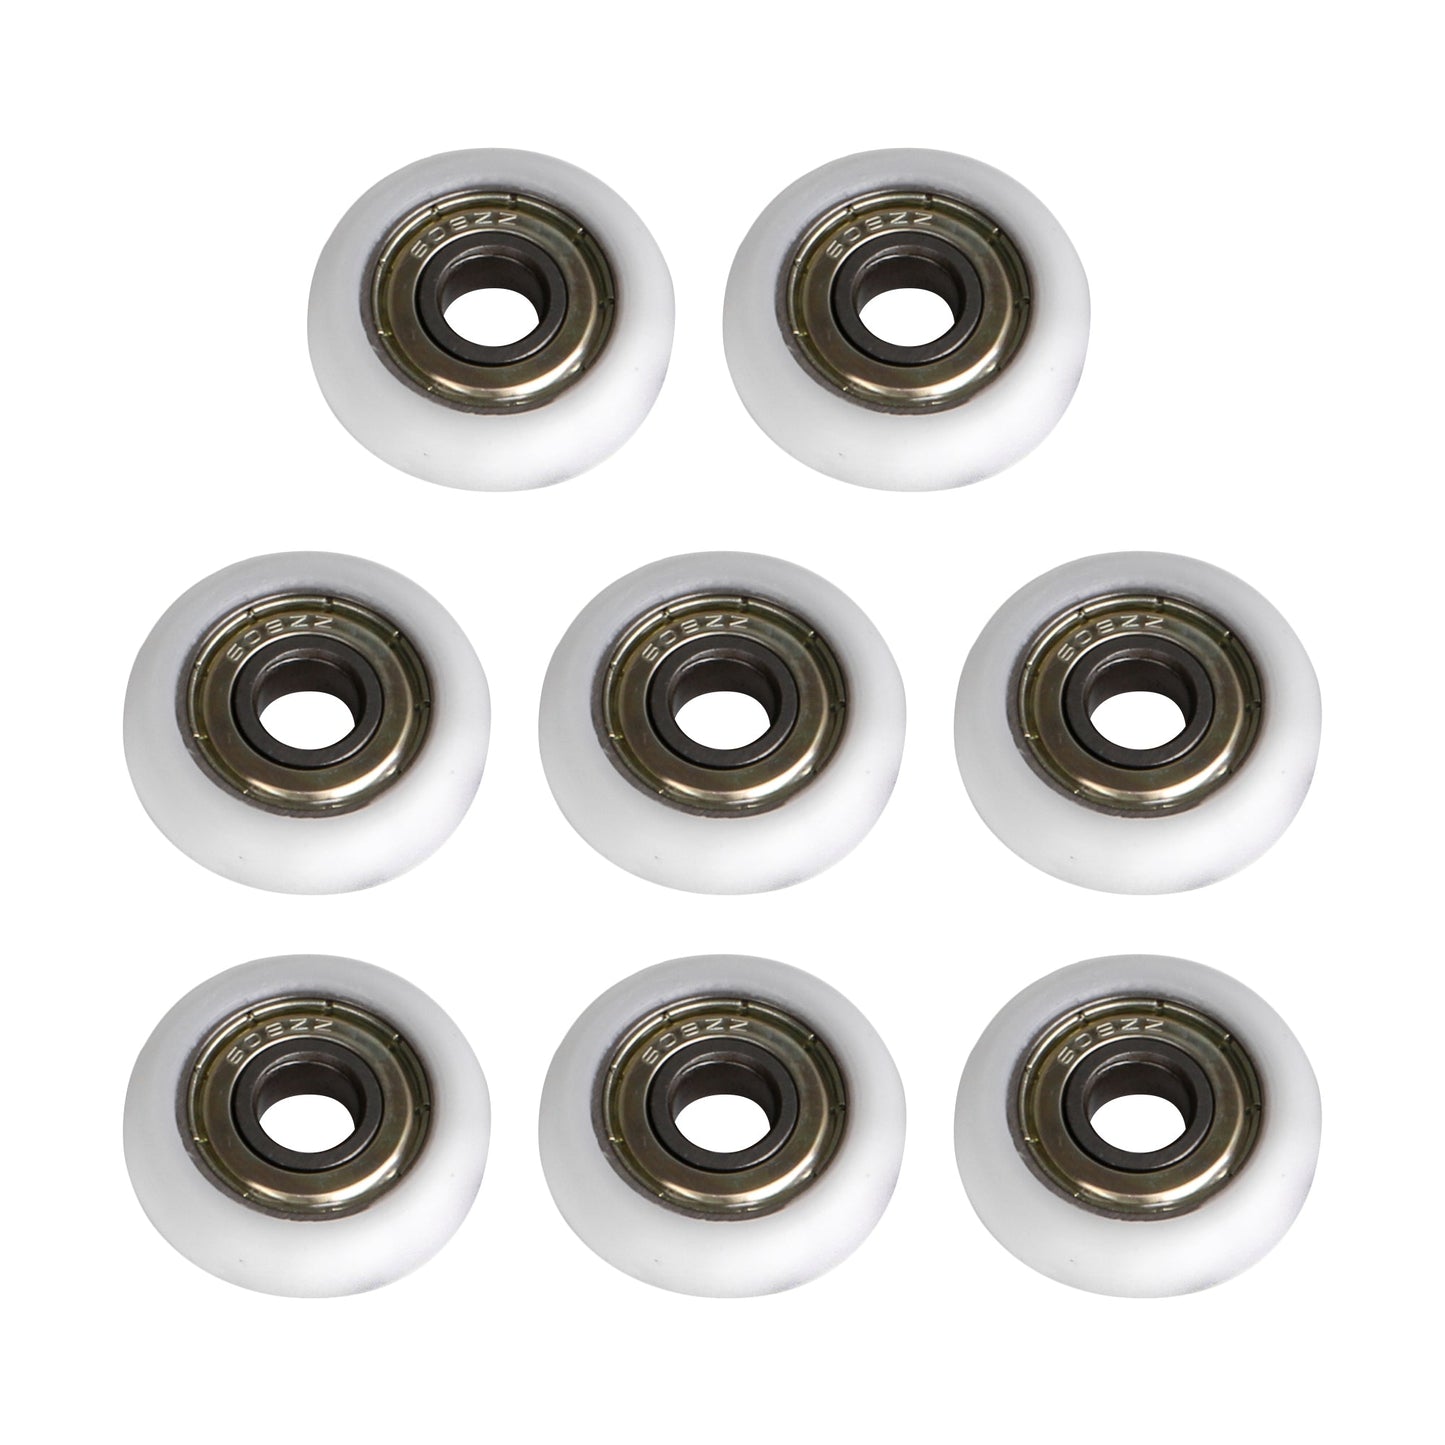 BQLZR Industrial Bearing Pulley 8 x 30 x 8.5mm Spherical Arc White Load 87KG Pack of 8